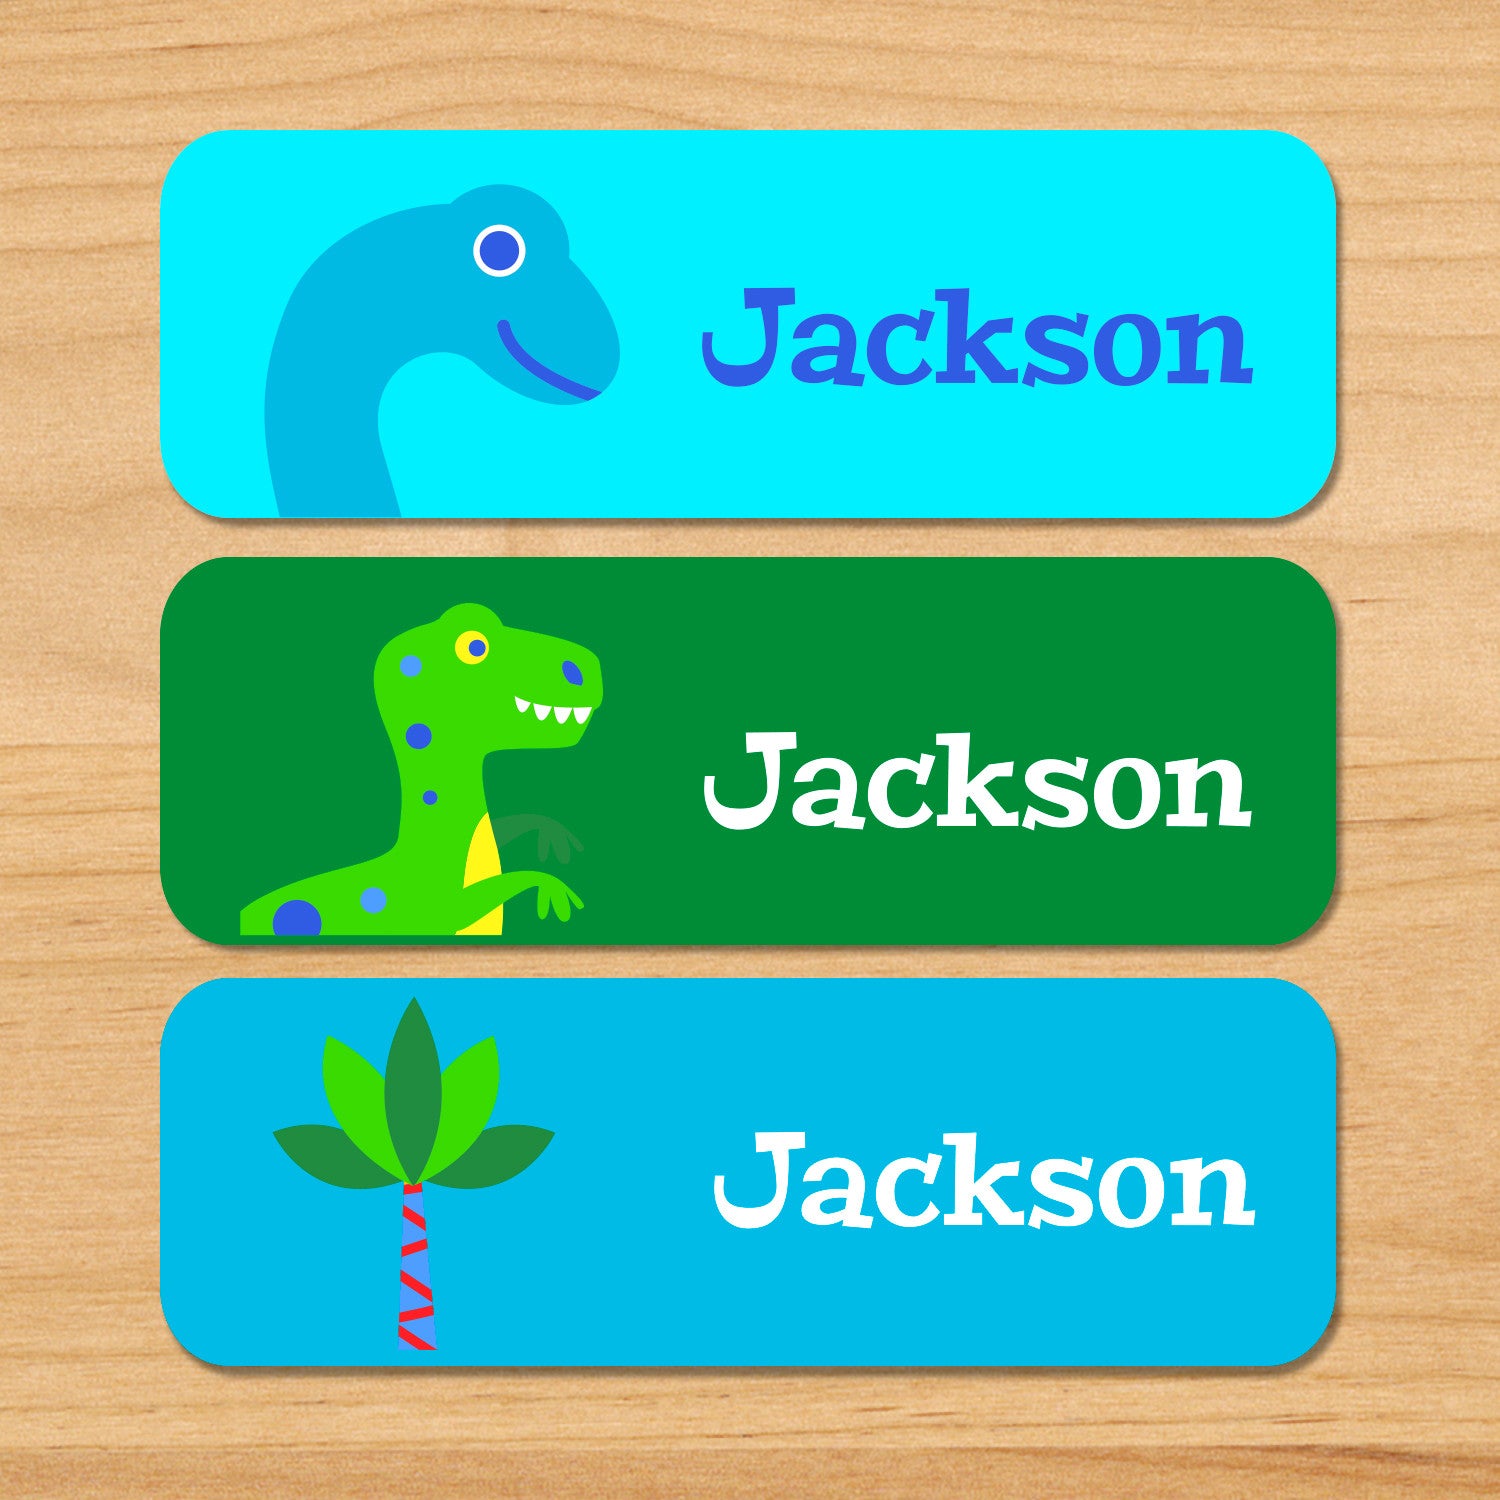 Dinosaur name labels, Editable by Sand and Sunsets